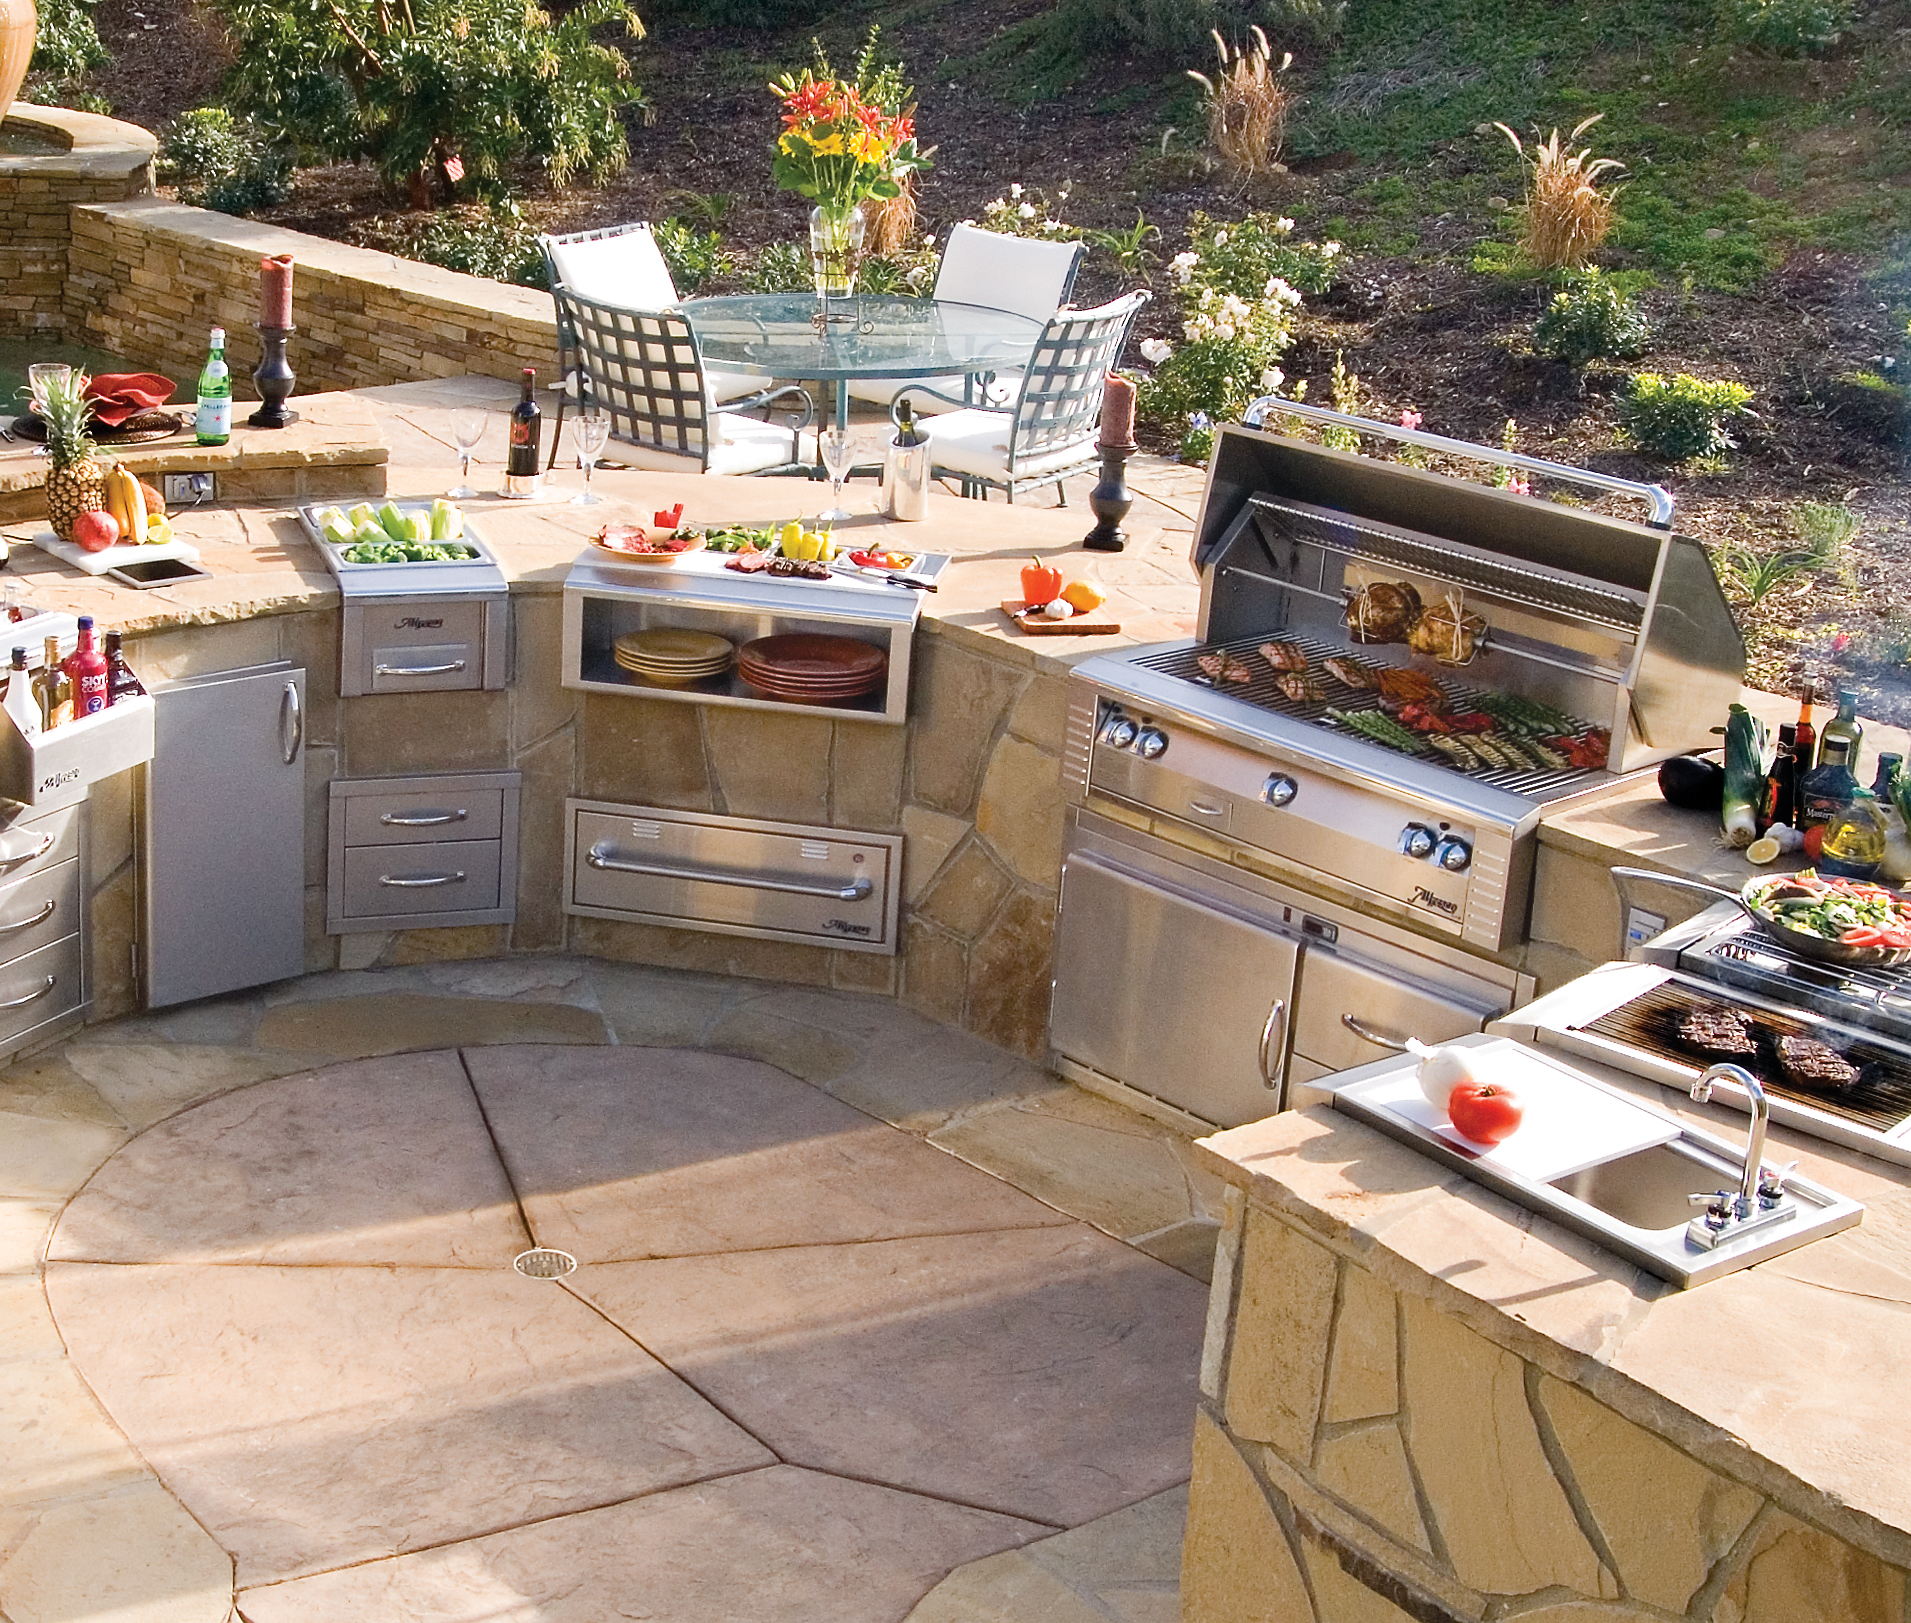 Taking Care of Your Outdoor Kitchen